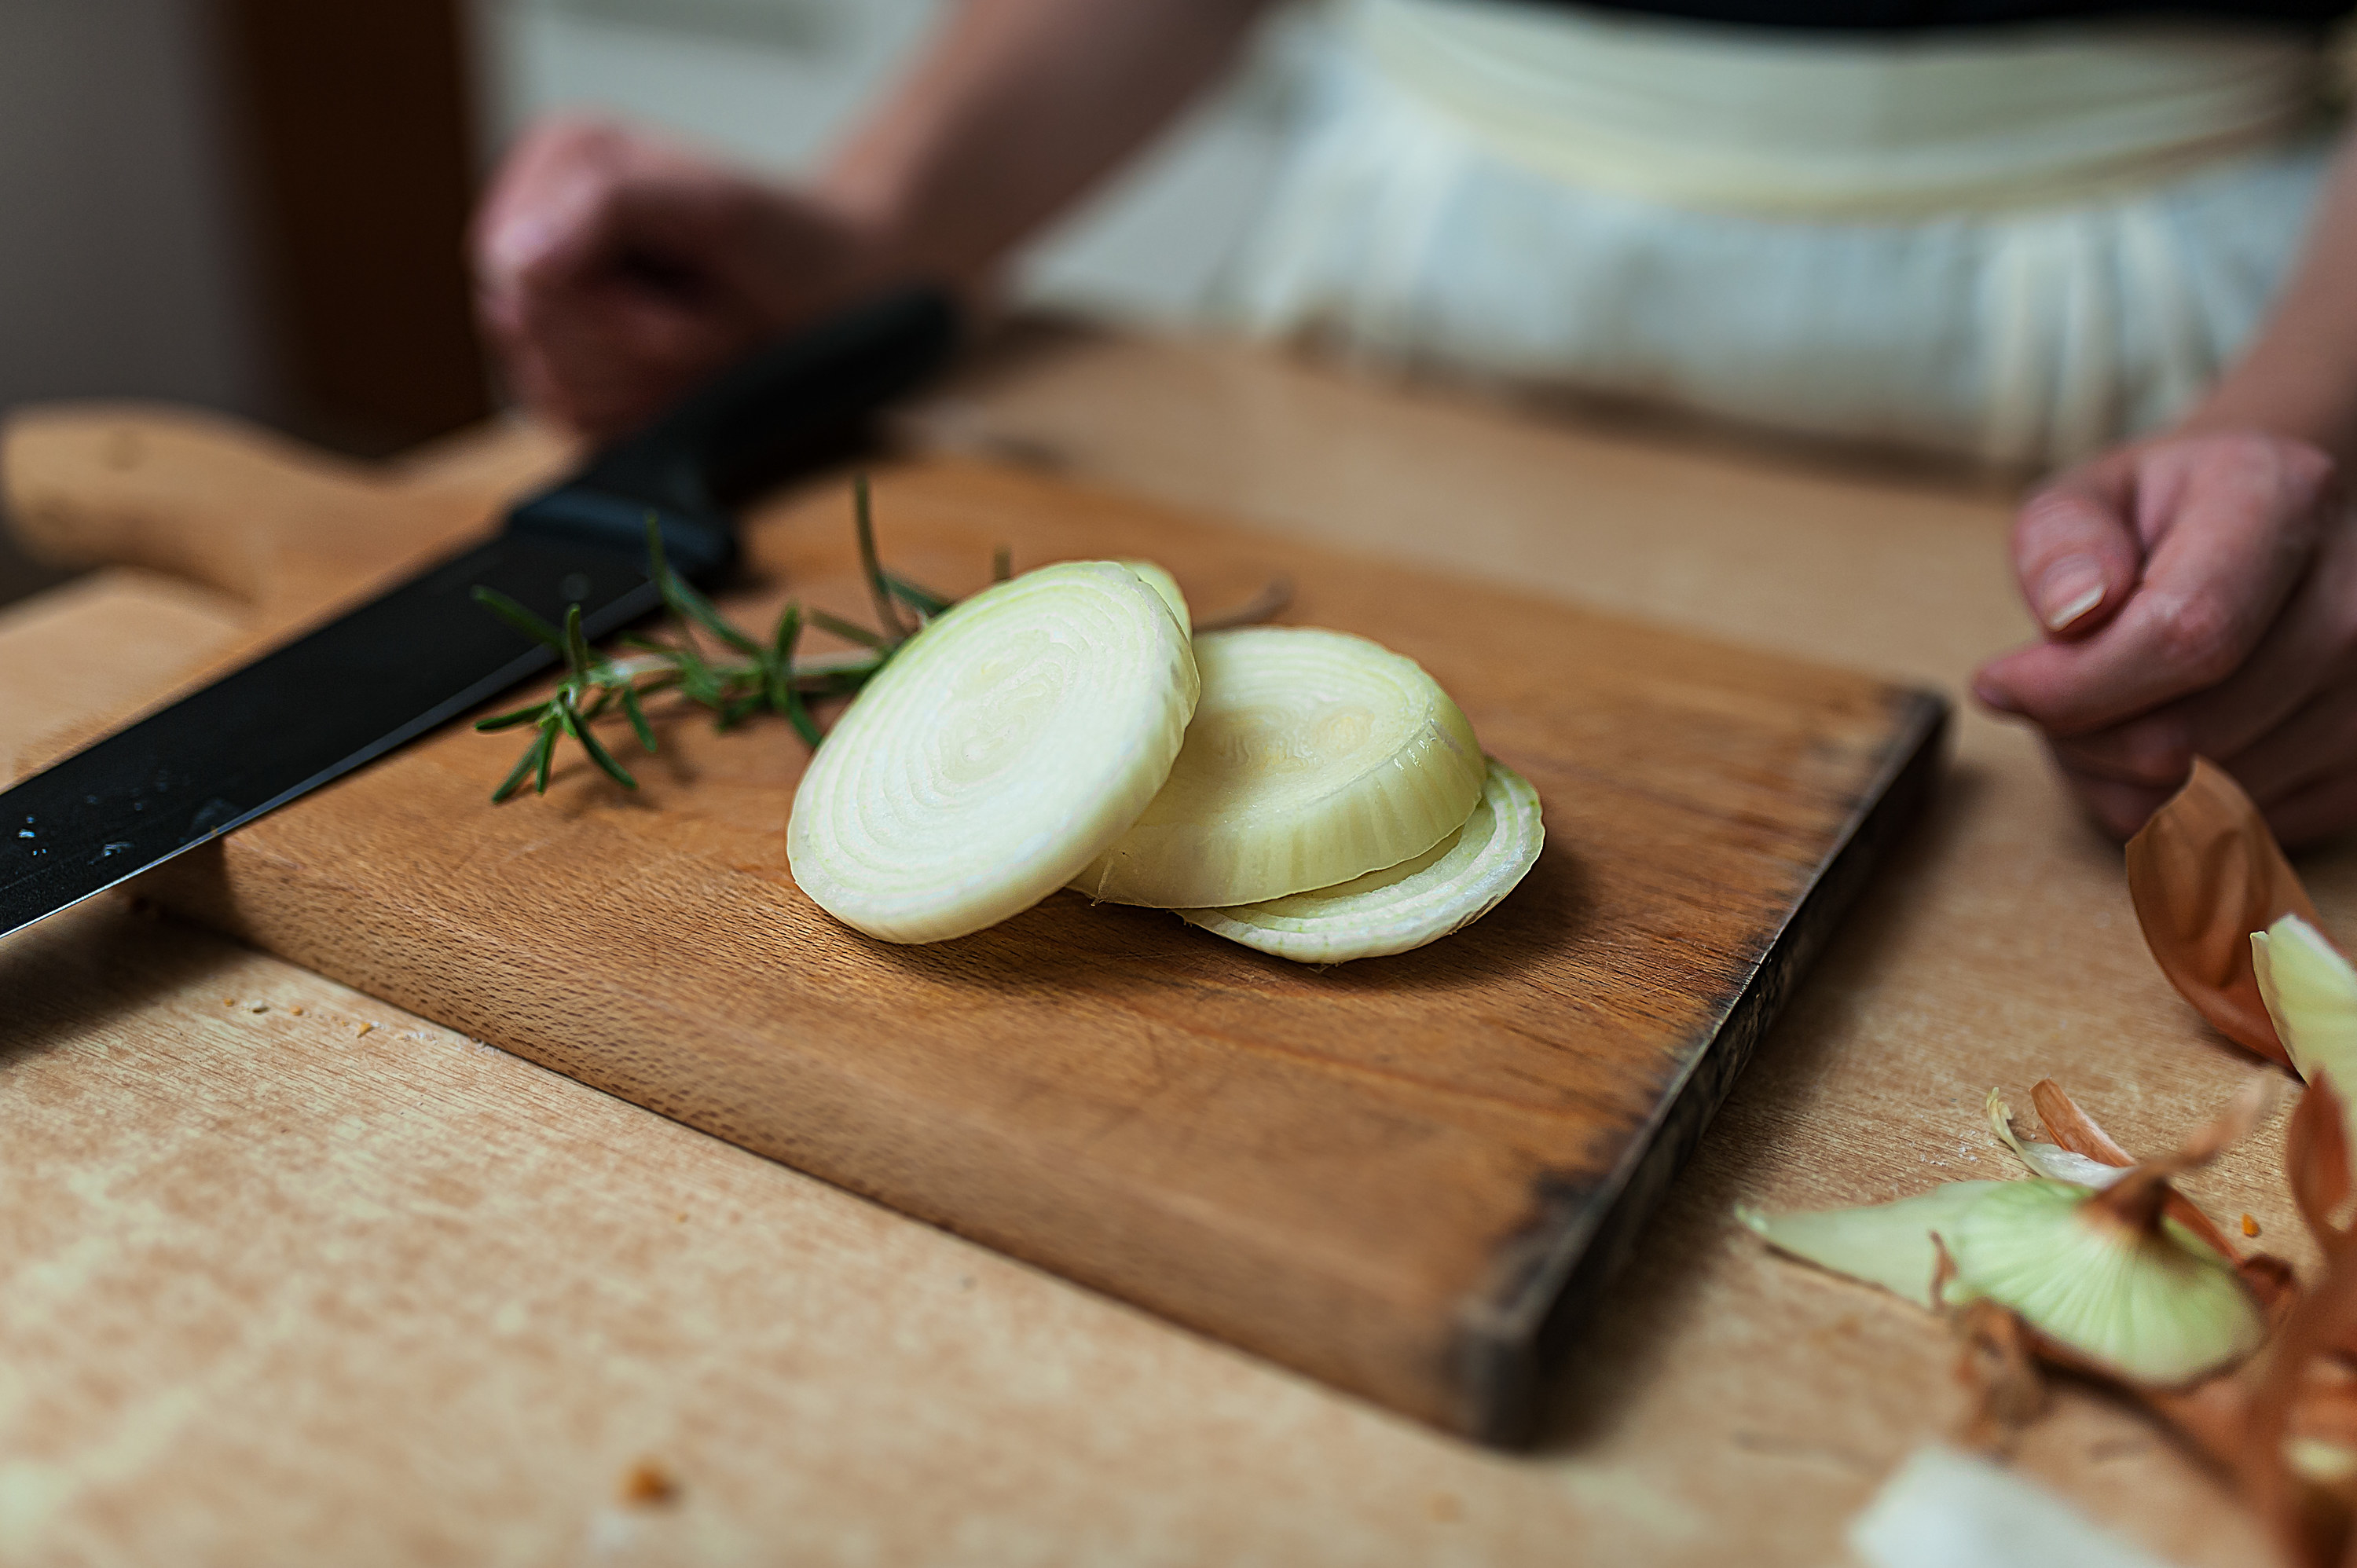 Round slices of onions with herbs on a cutting board